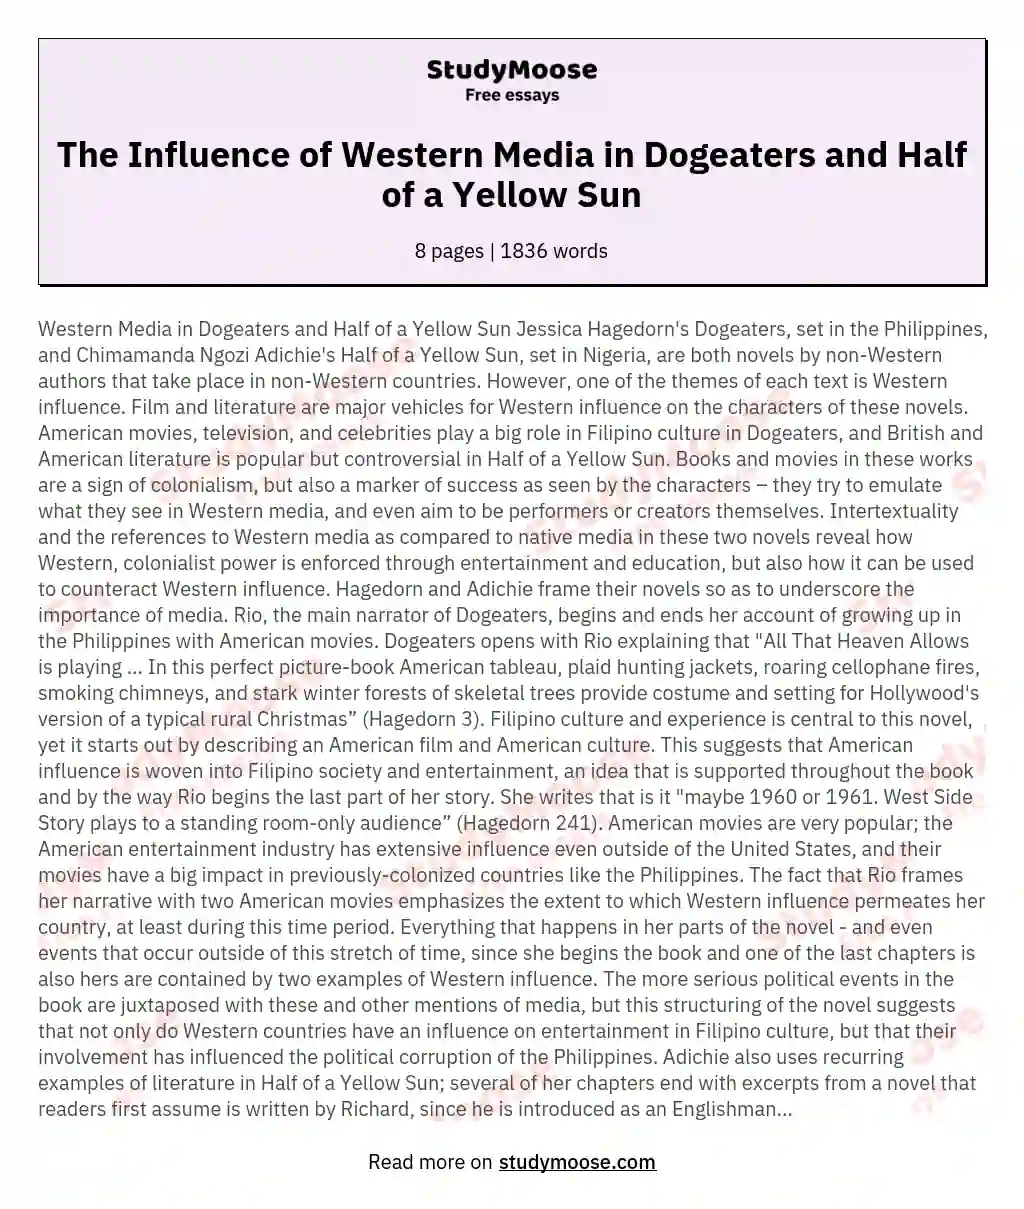 The Influence of Western Media in Dogeaters and Half of a Yellow Sun essay